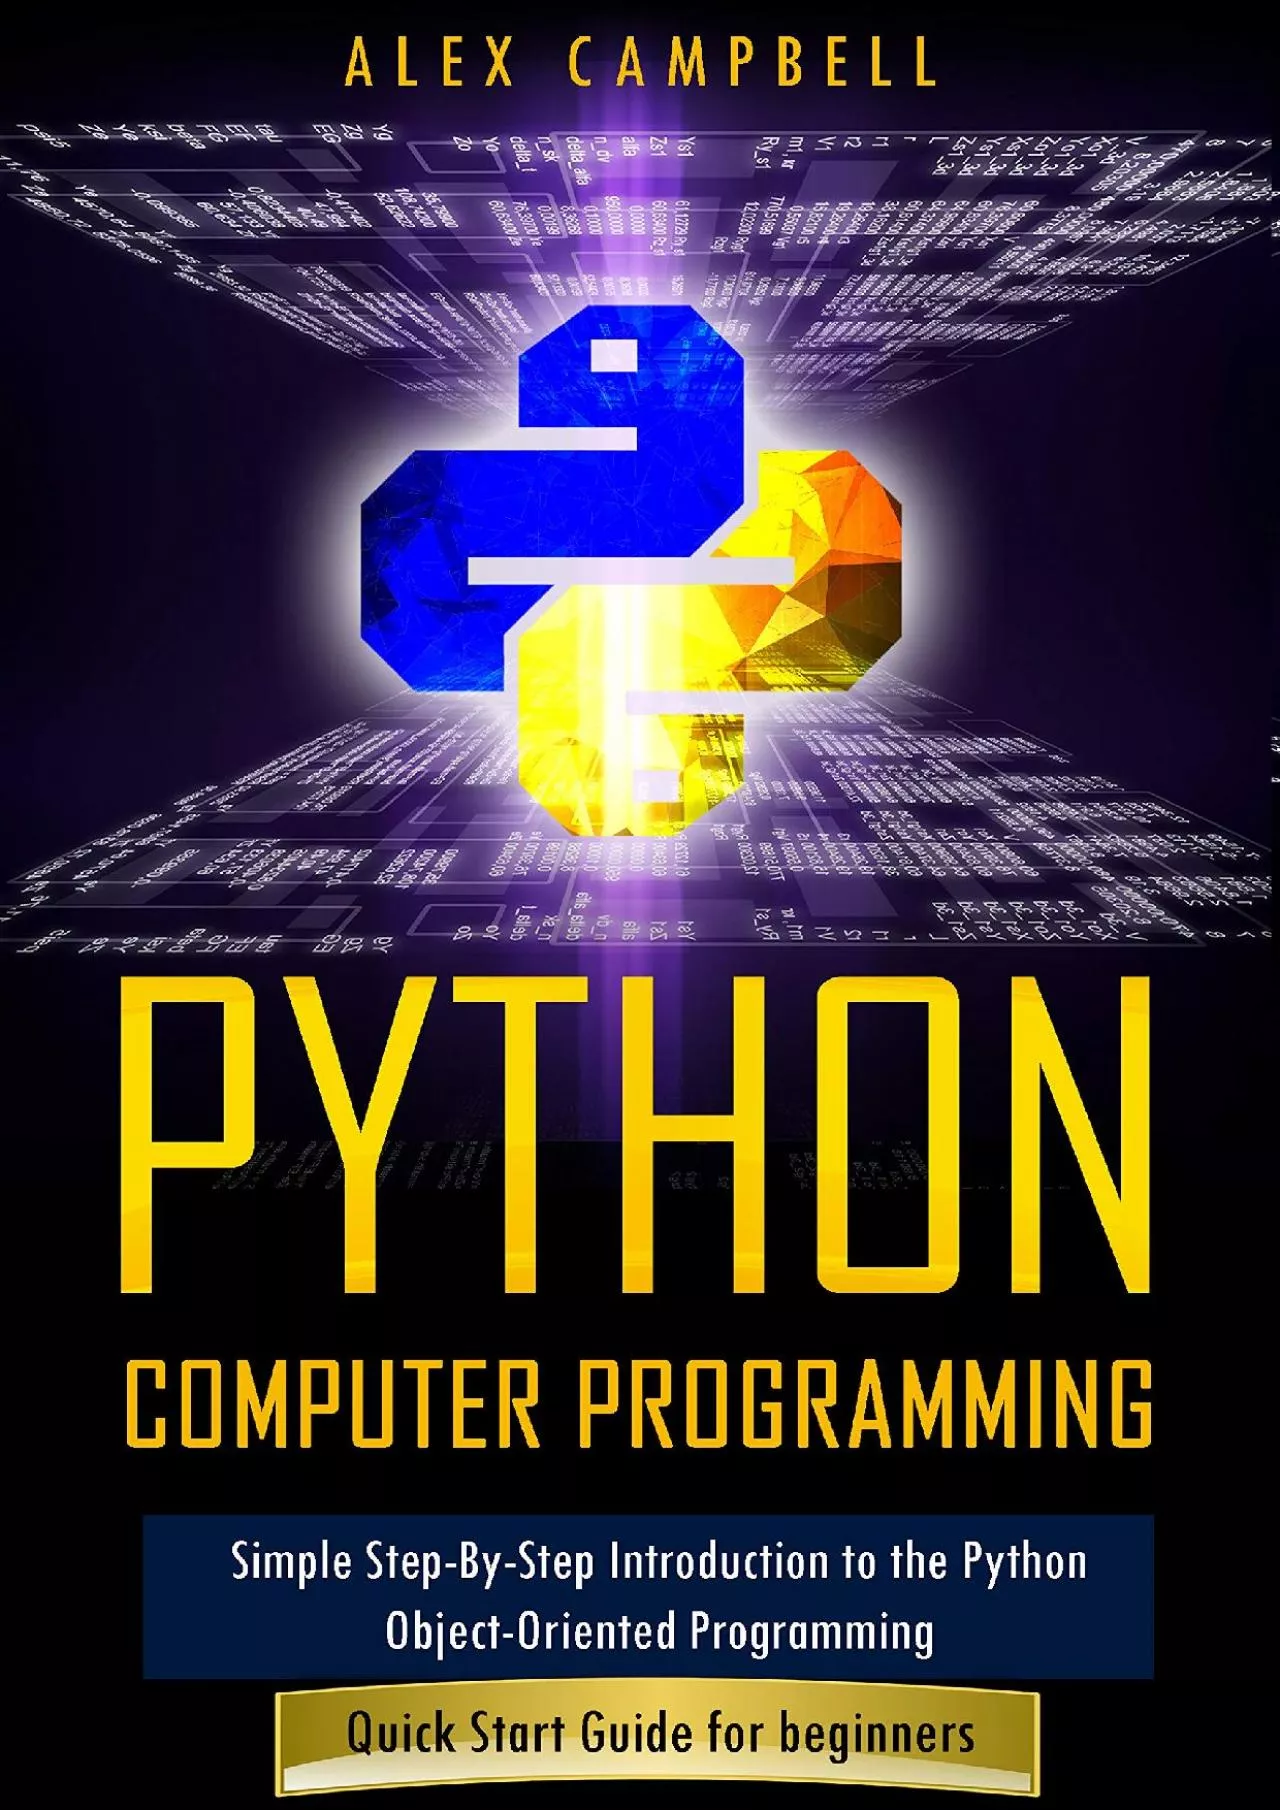 [PDF]-Python Computer Programming: Simple Step-By-Step Introduction to the Python Object-Oriented